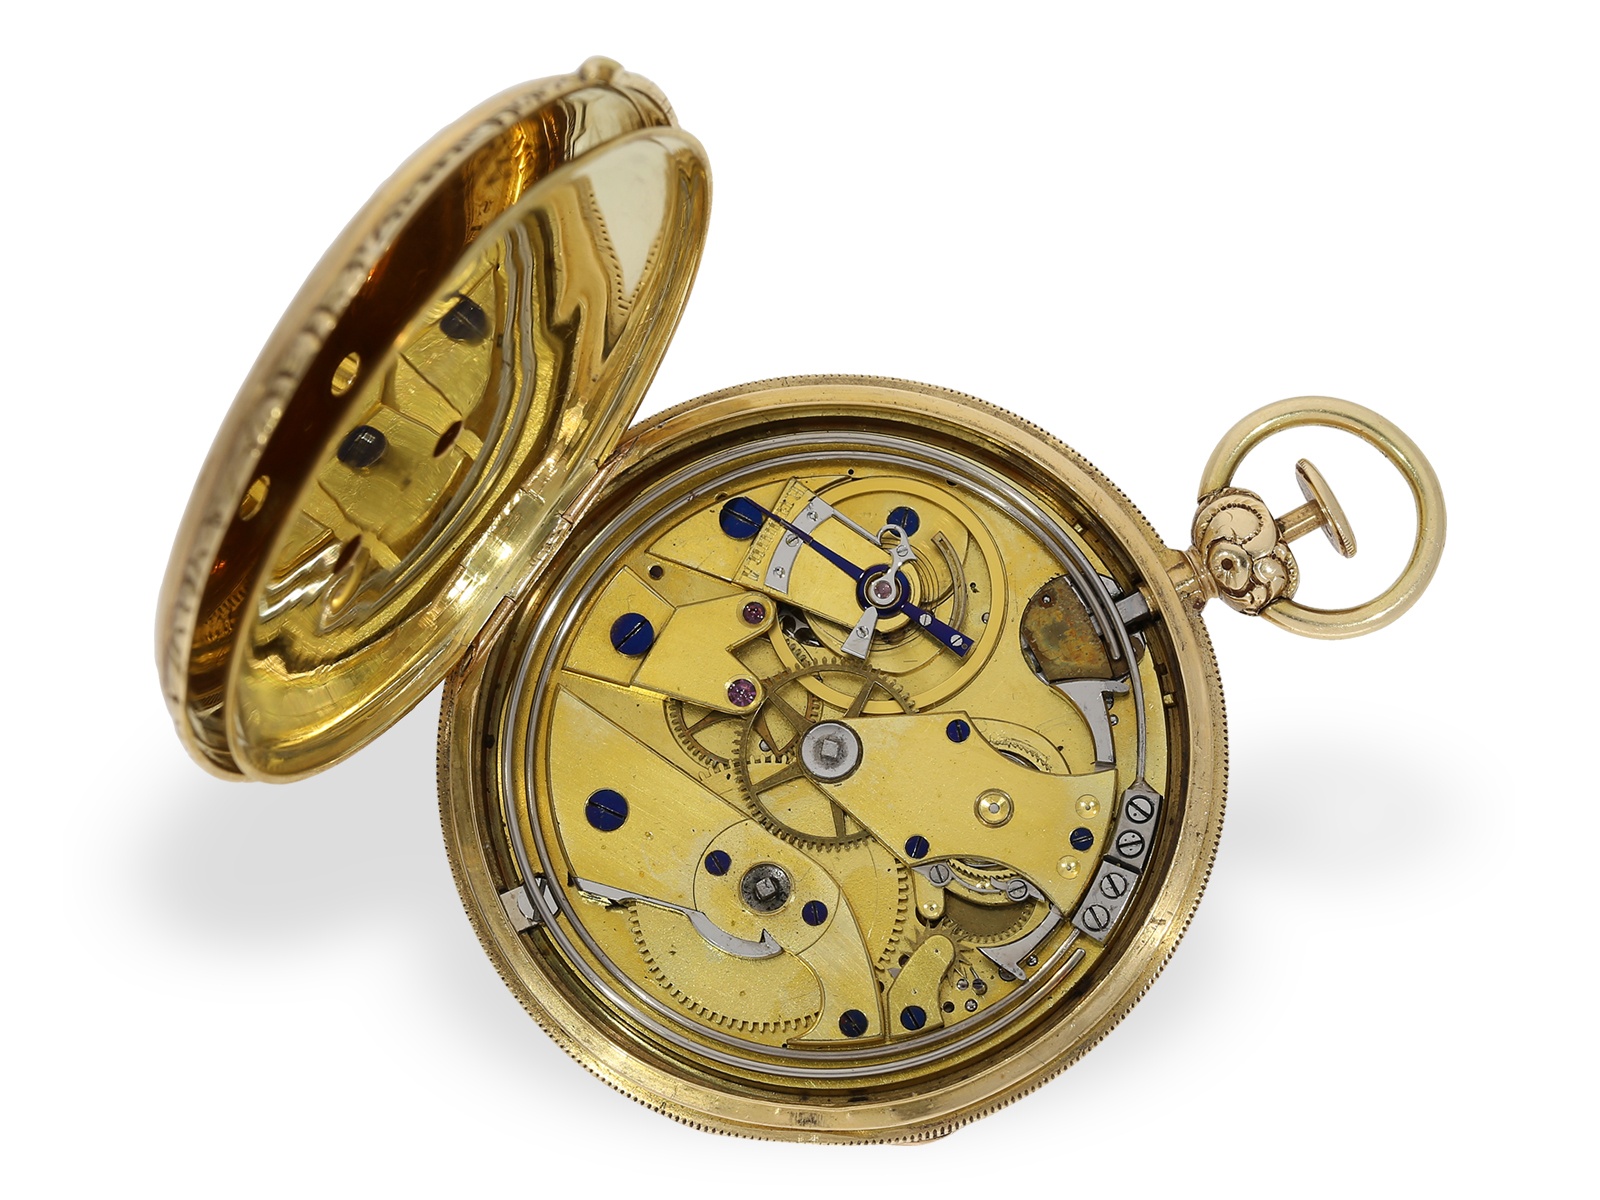 Pocket watch: important enamel watch with erotic scene, repeater and ruby cylinder escapement, Alleg - Image 3 of 7